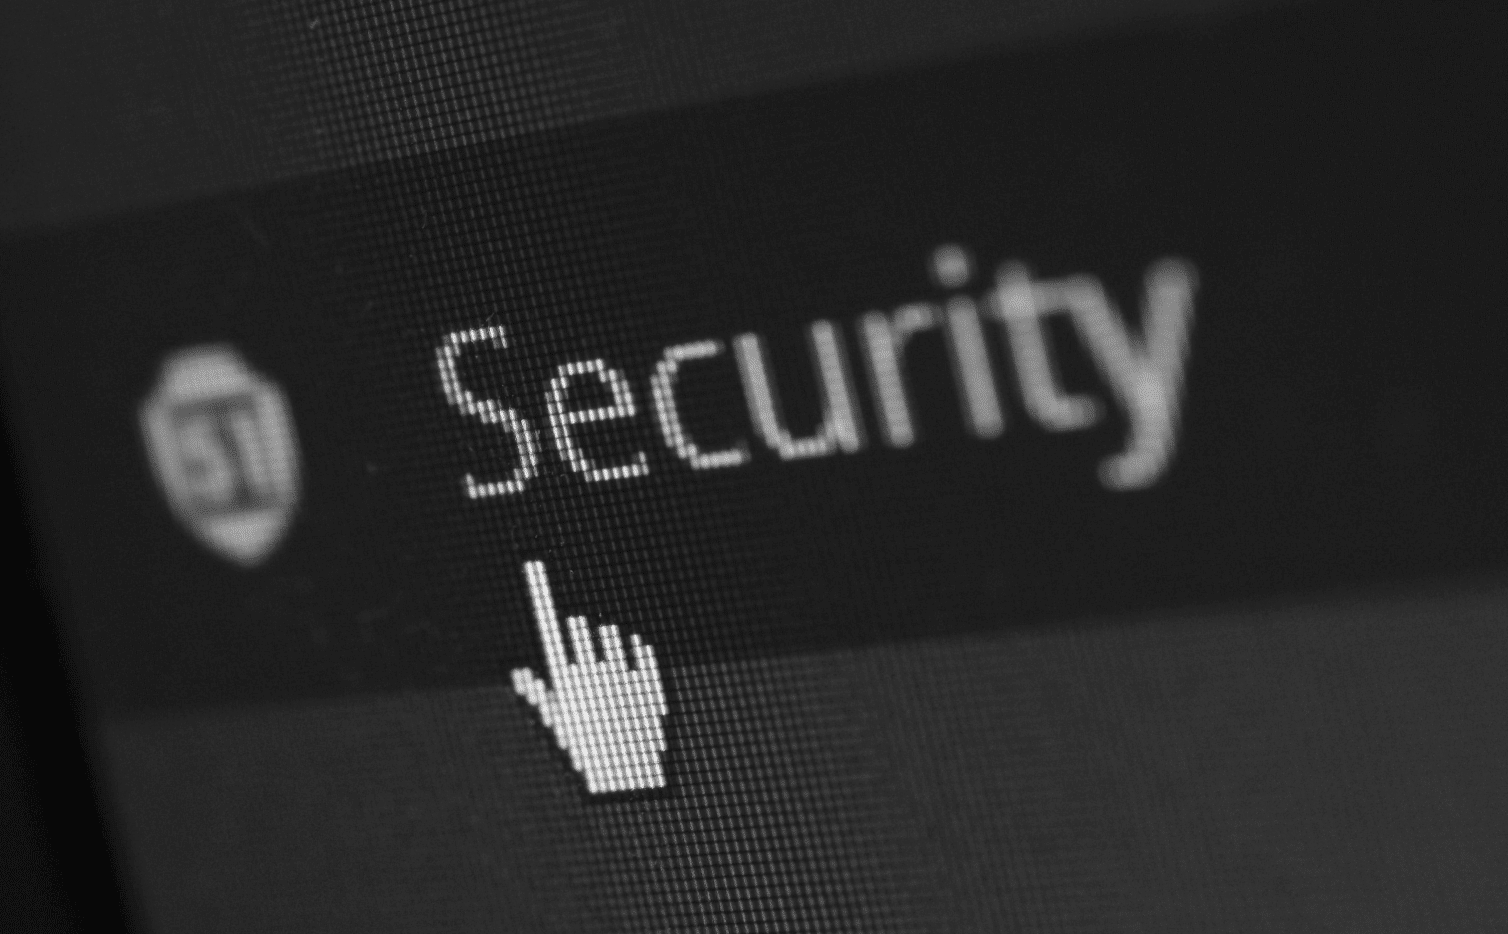 This image of a cursor moving over the word "security" on a browser highlights this topic's domain cybersecurity discussion.